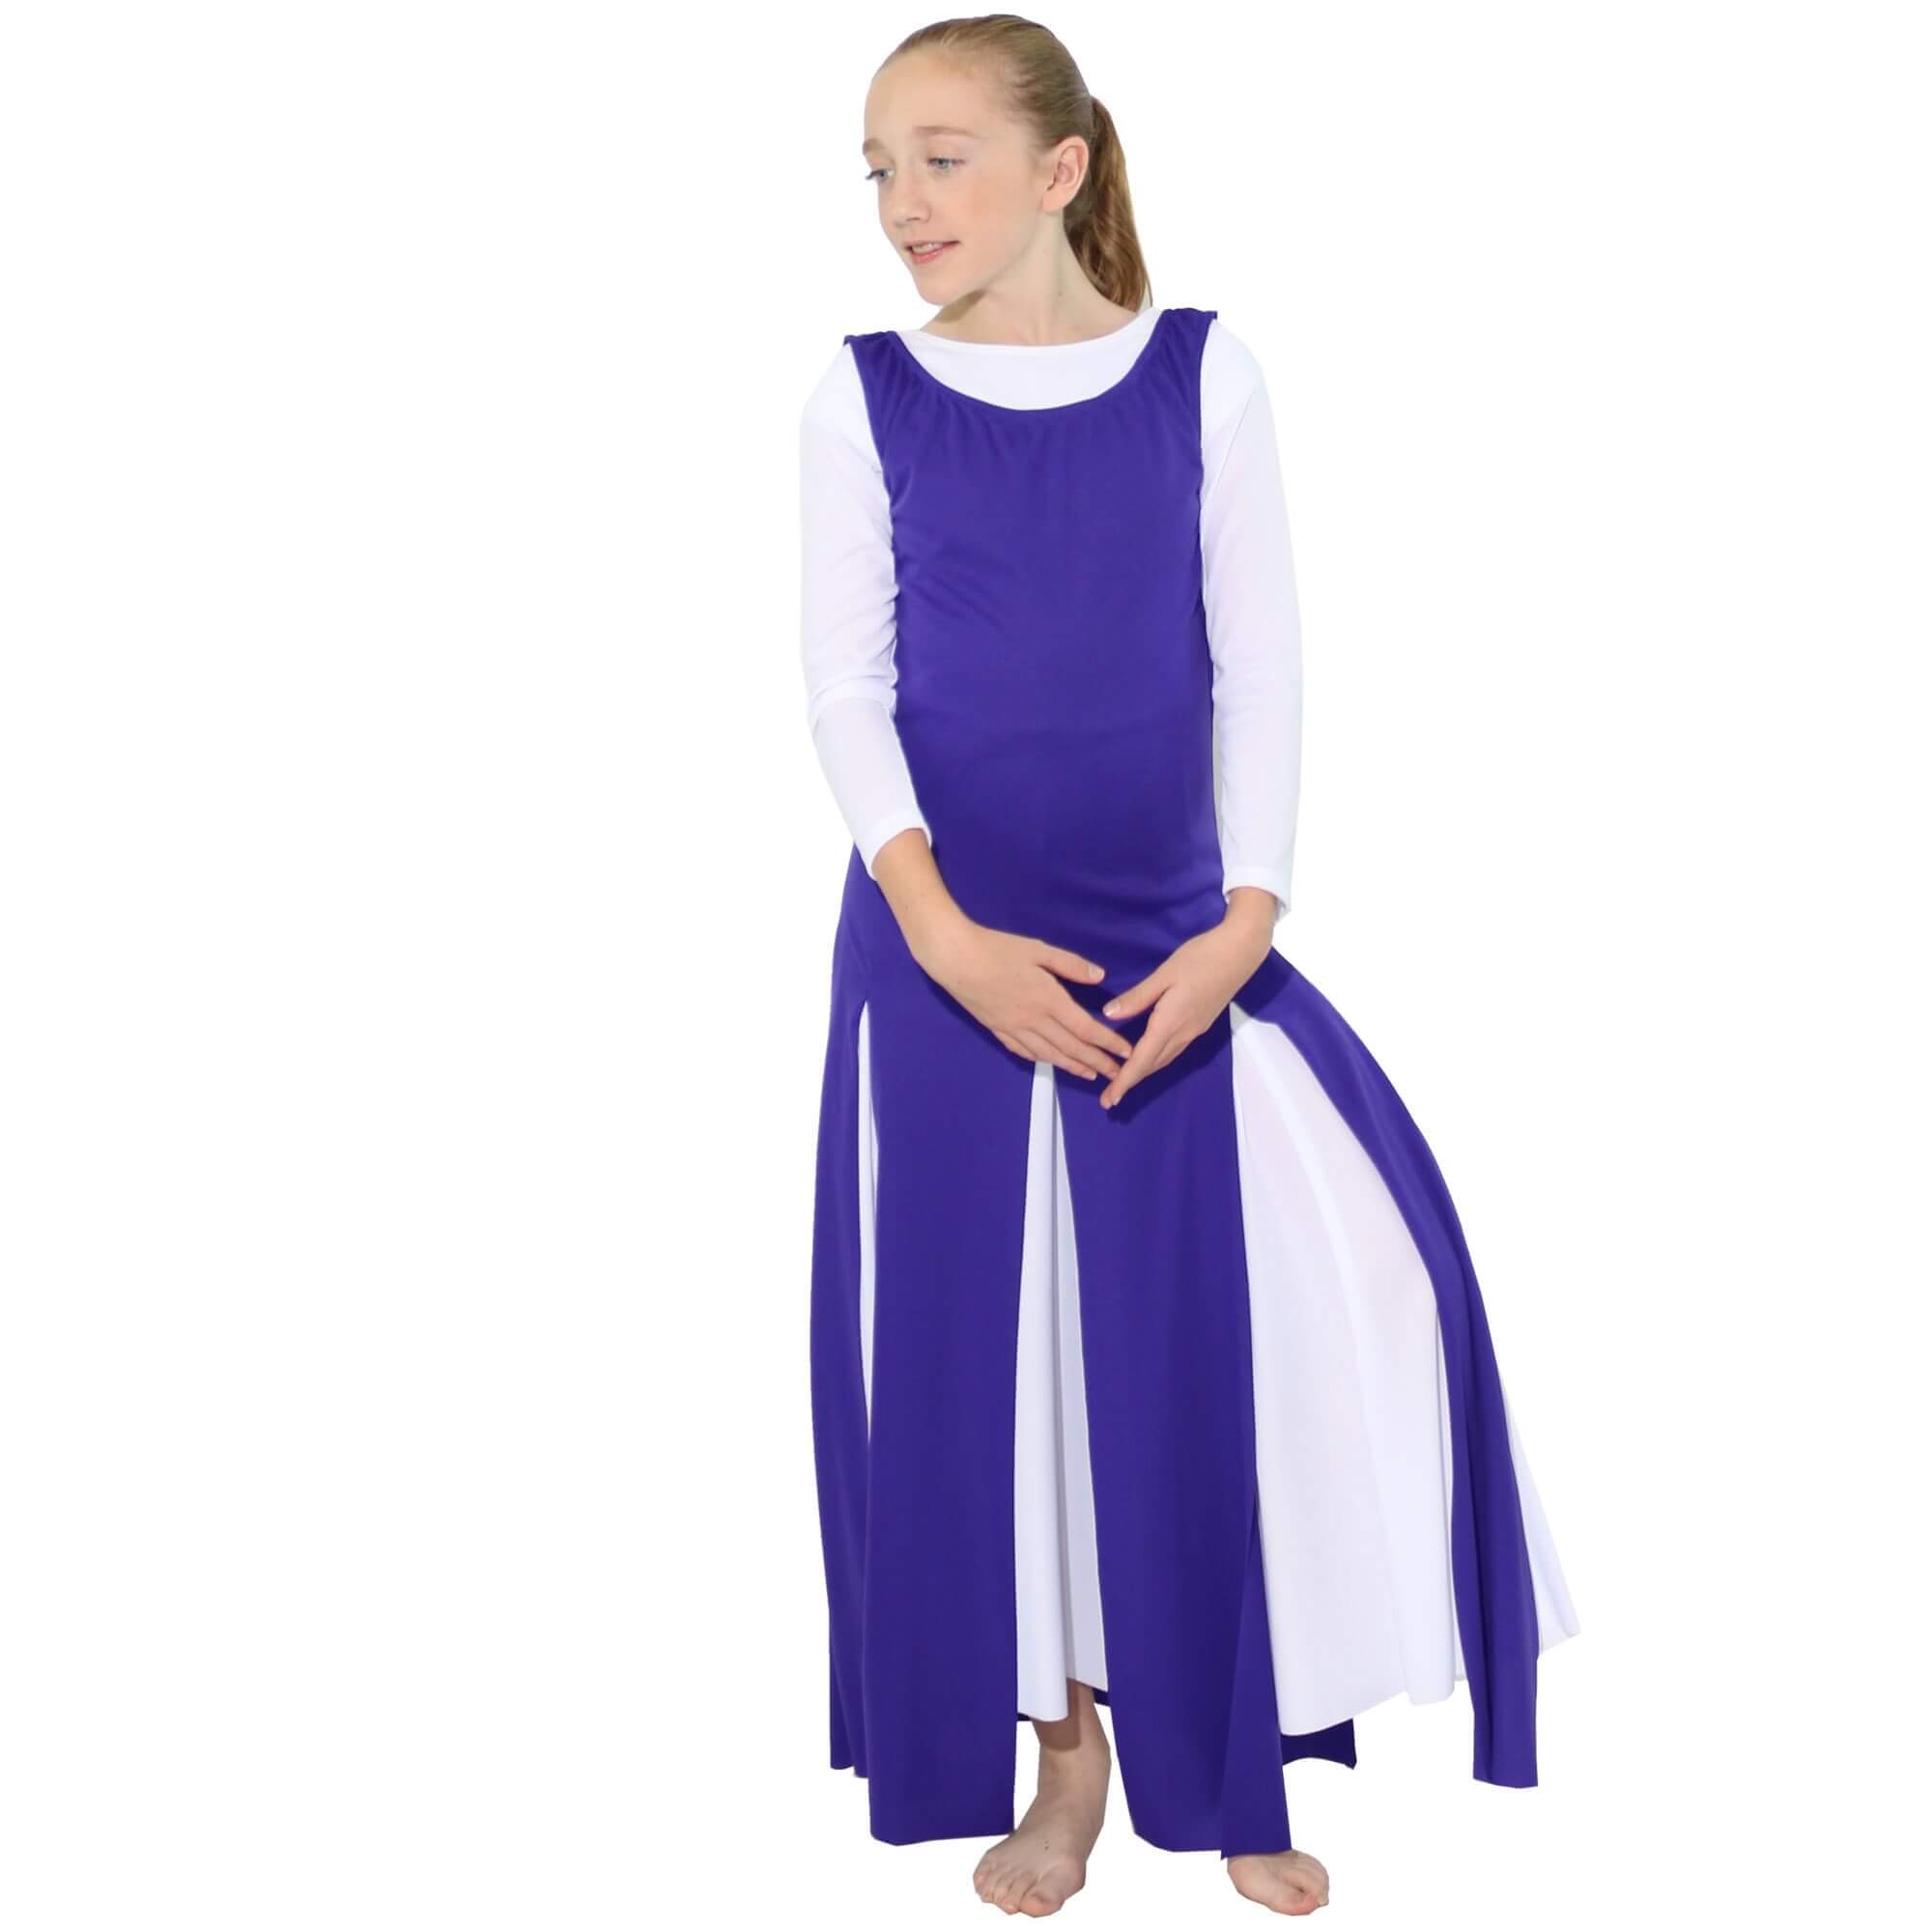 Danzcue Child Praise Dance Paneled Tunic (white dress not included) - Click Image to Close